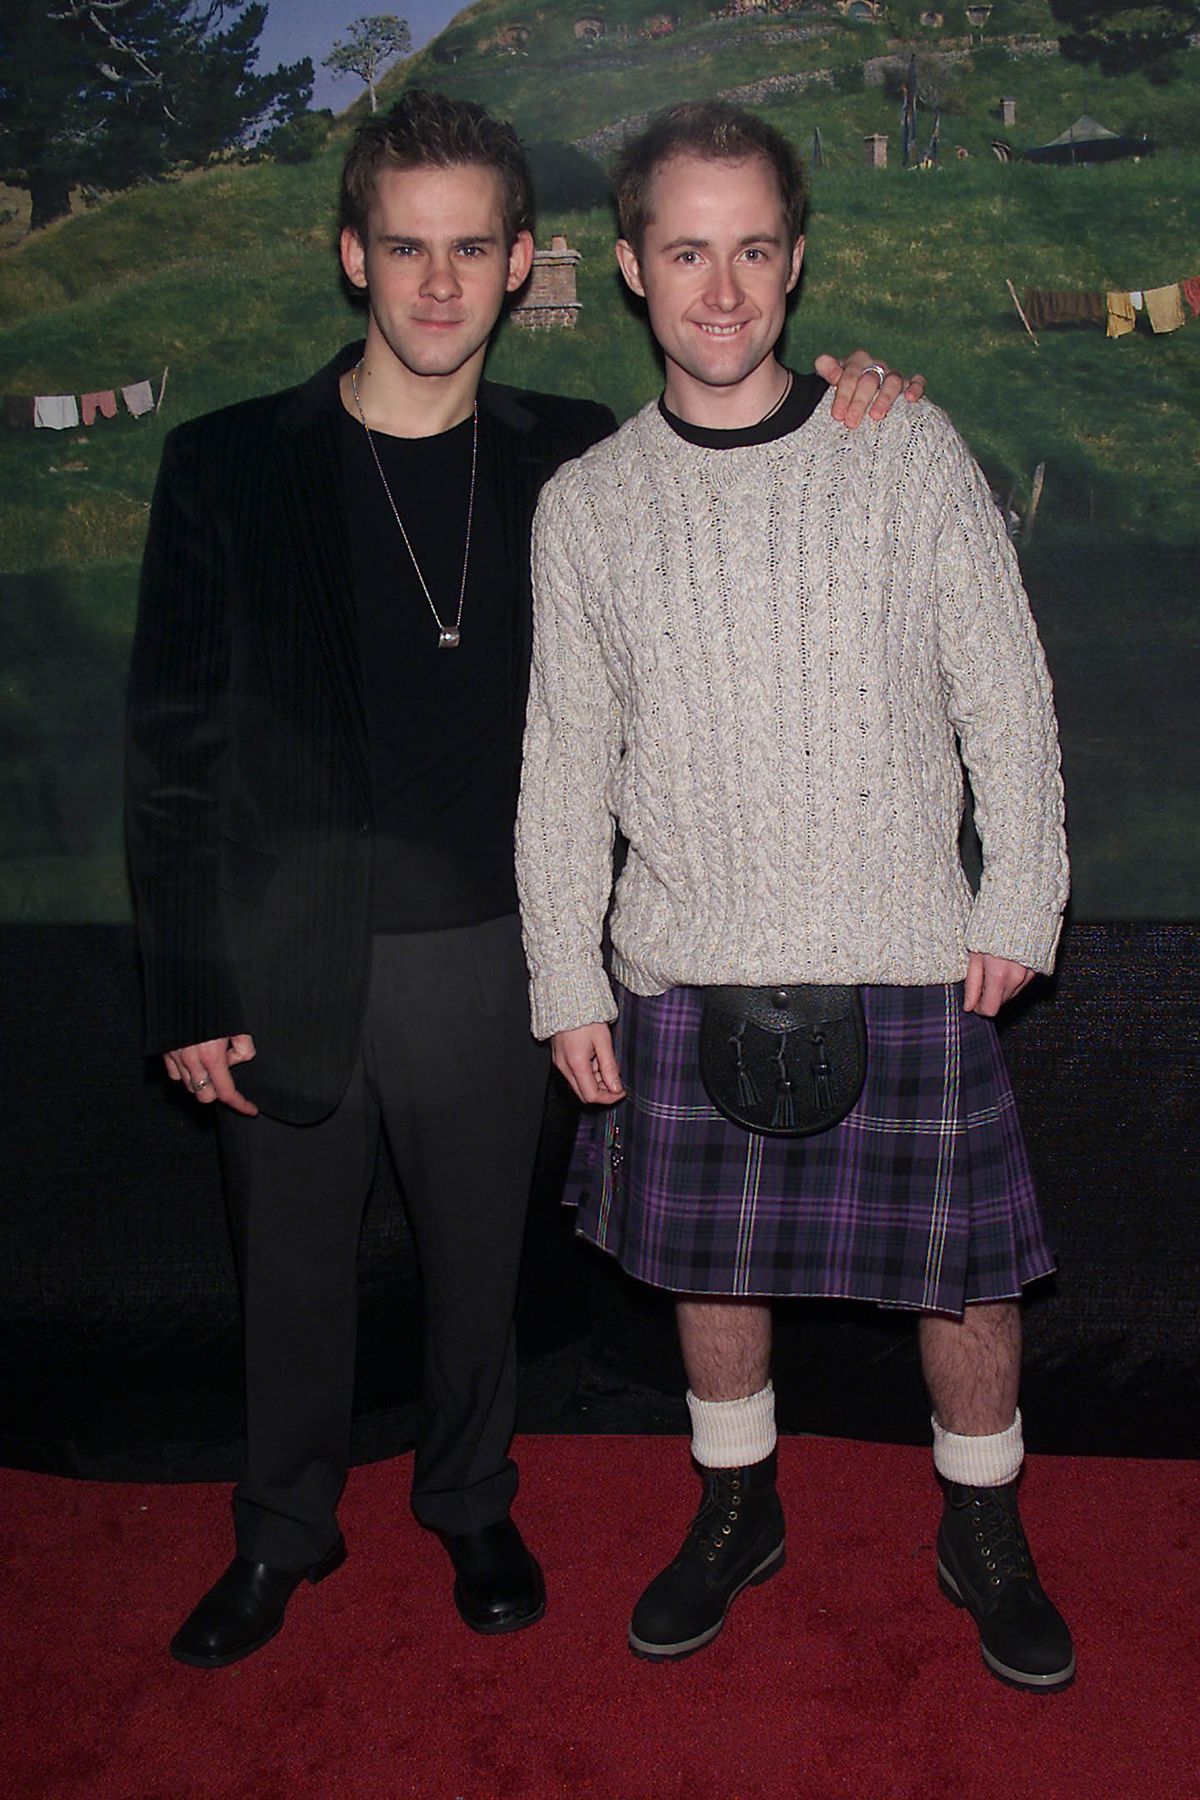 Dominic Monaghan and Billy Boyd on the red carpet for The Lord of the Rings: The Fellowship of the Ring’s New York City premiere